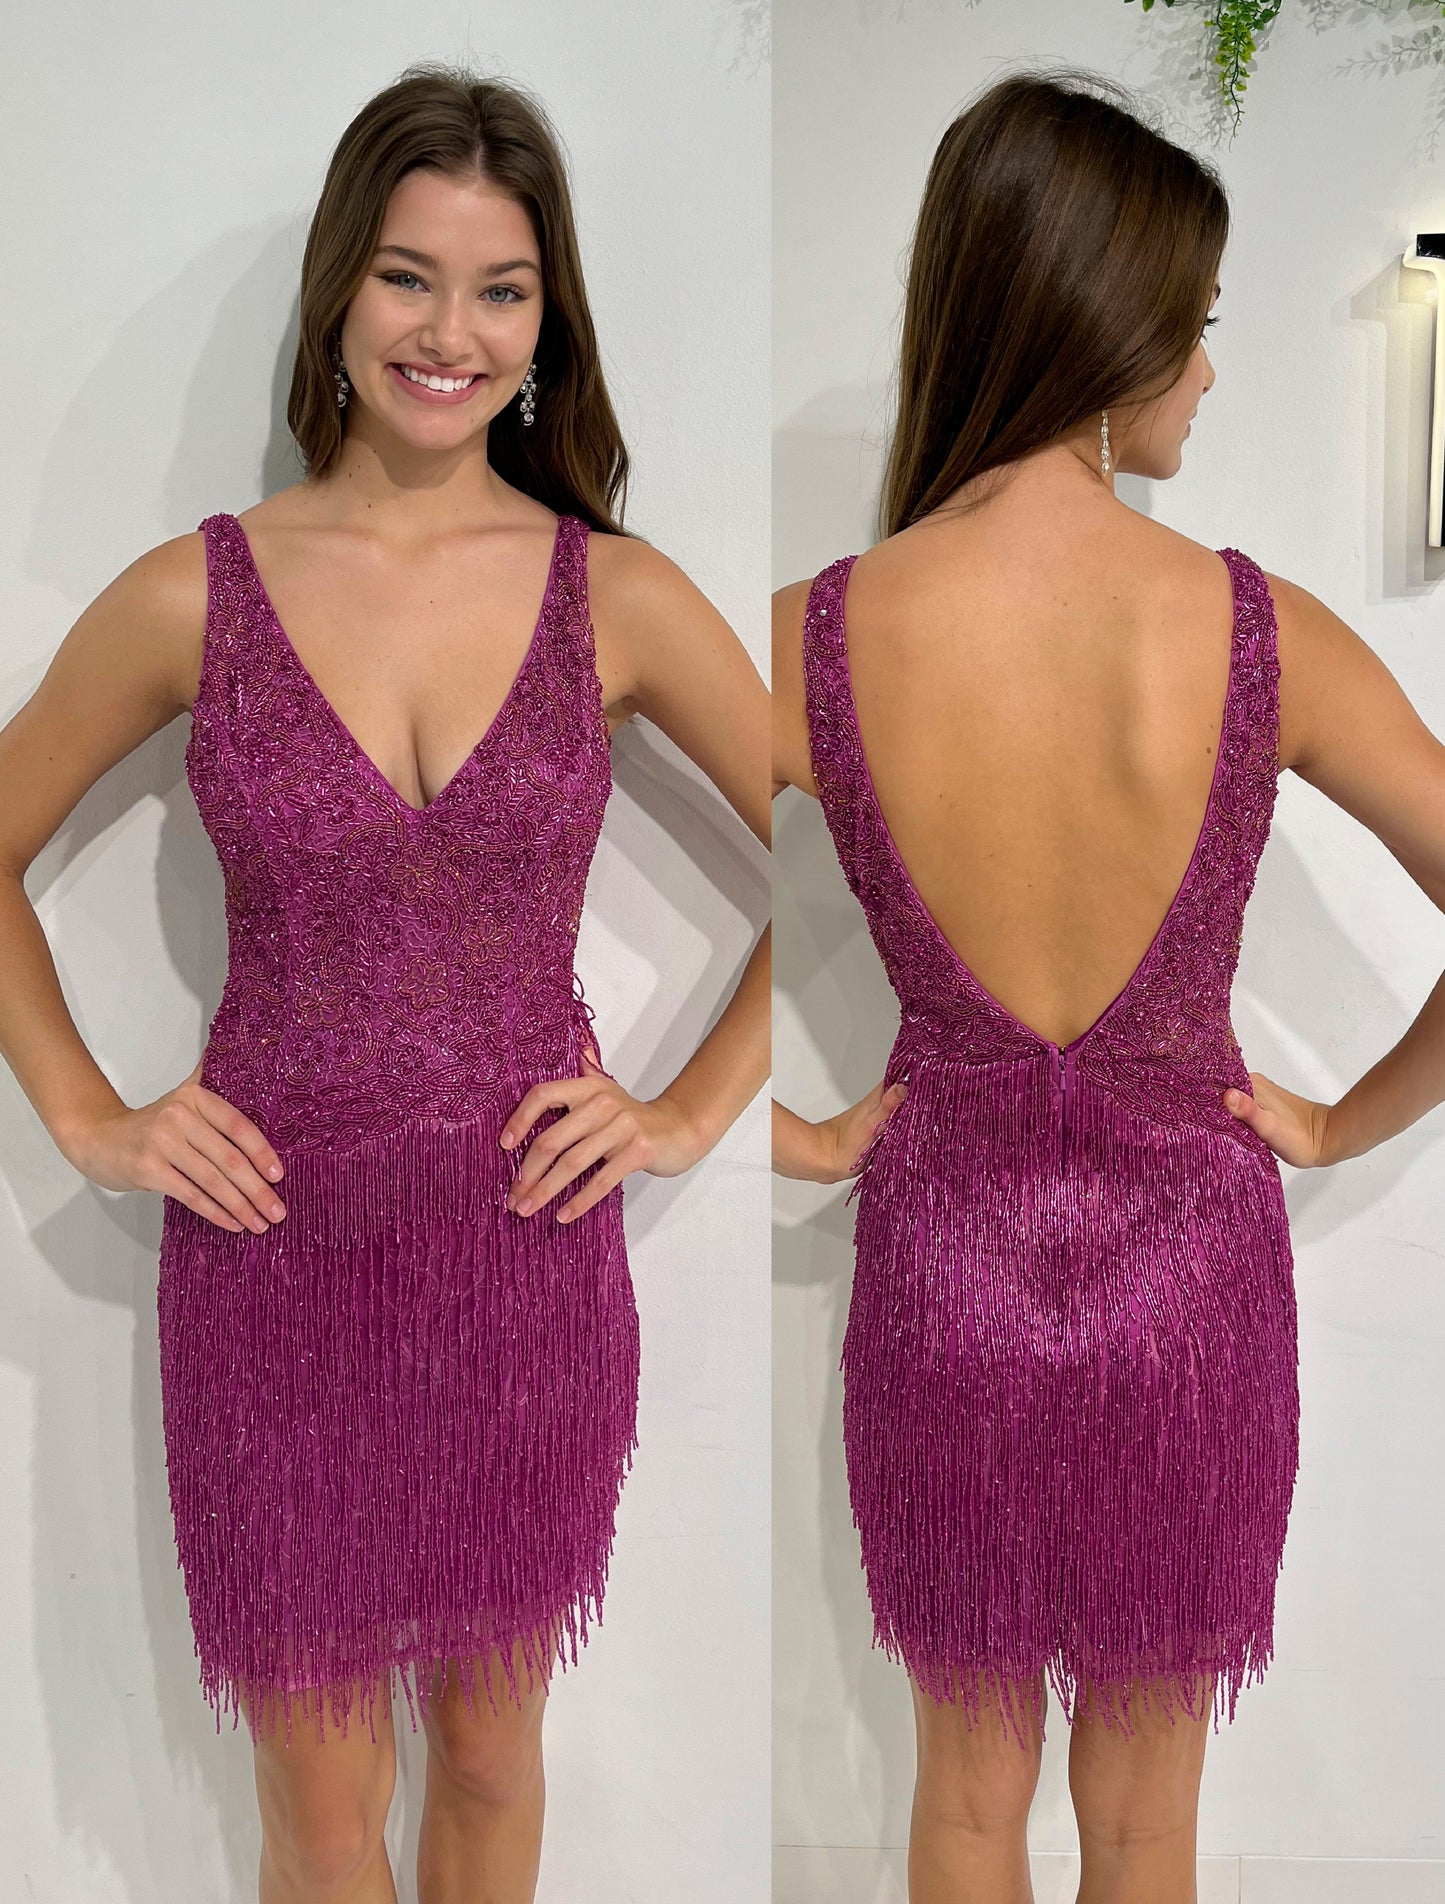 Primavera Couture 3828 Size 12 Gold Short Homecoming Dress Fitted Sequin Cocktail Dress